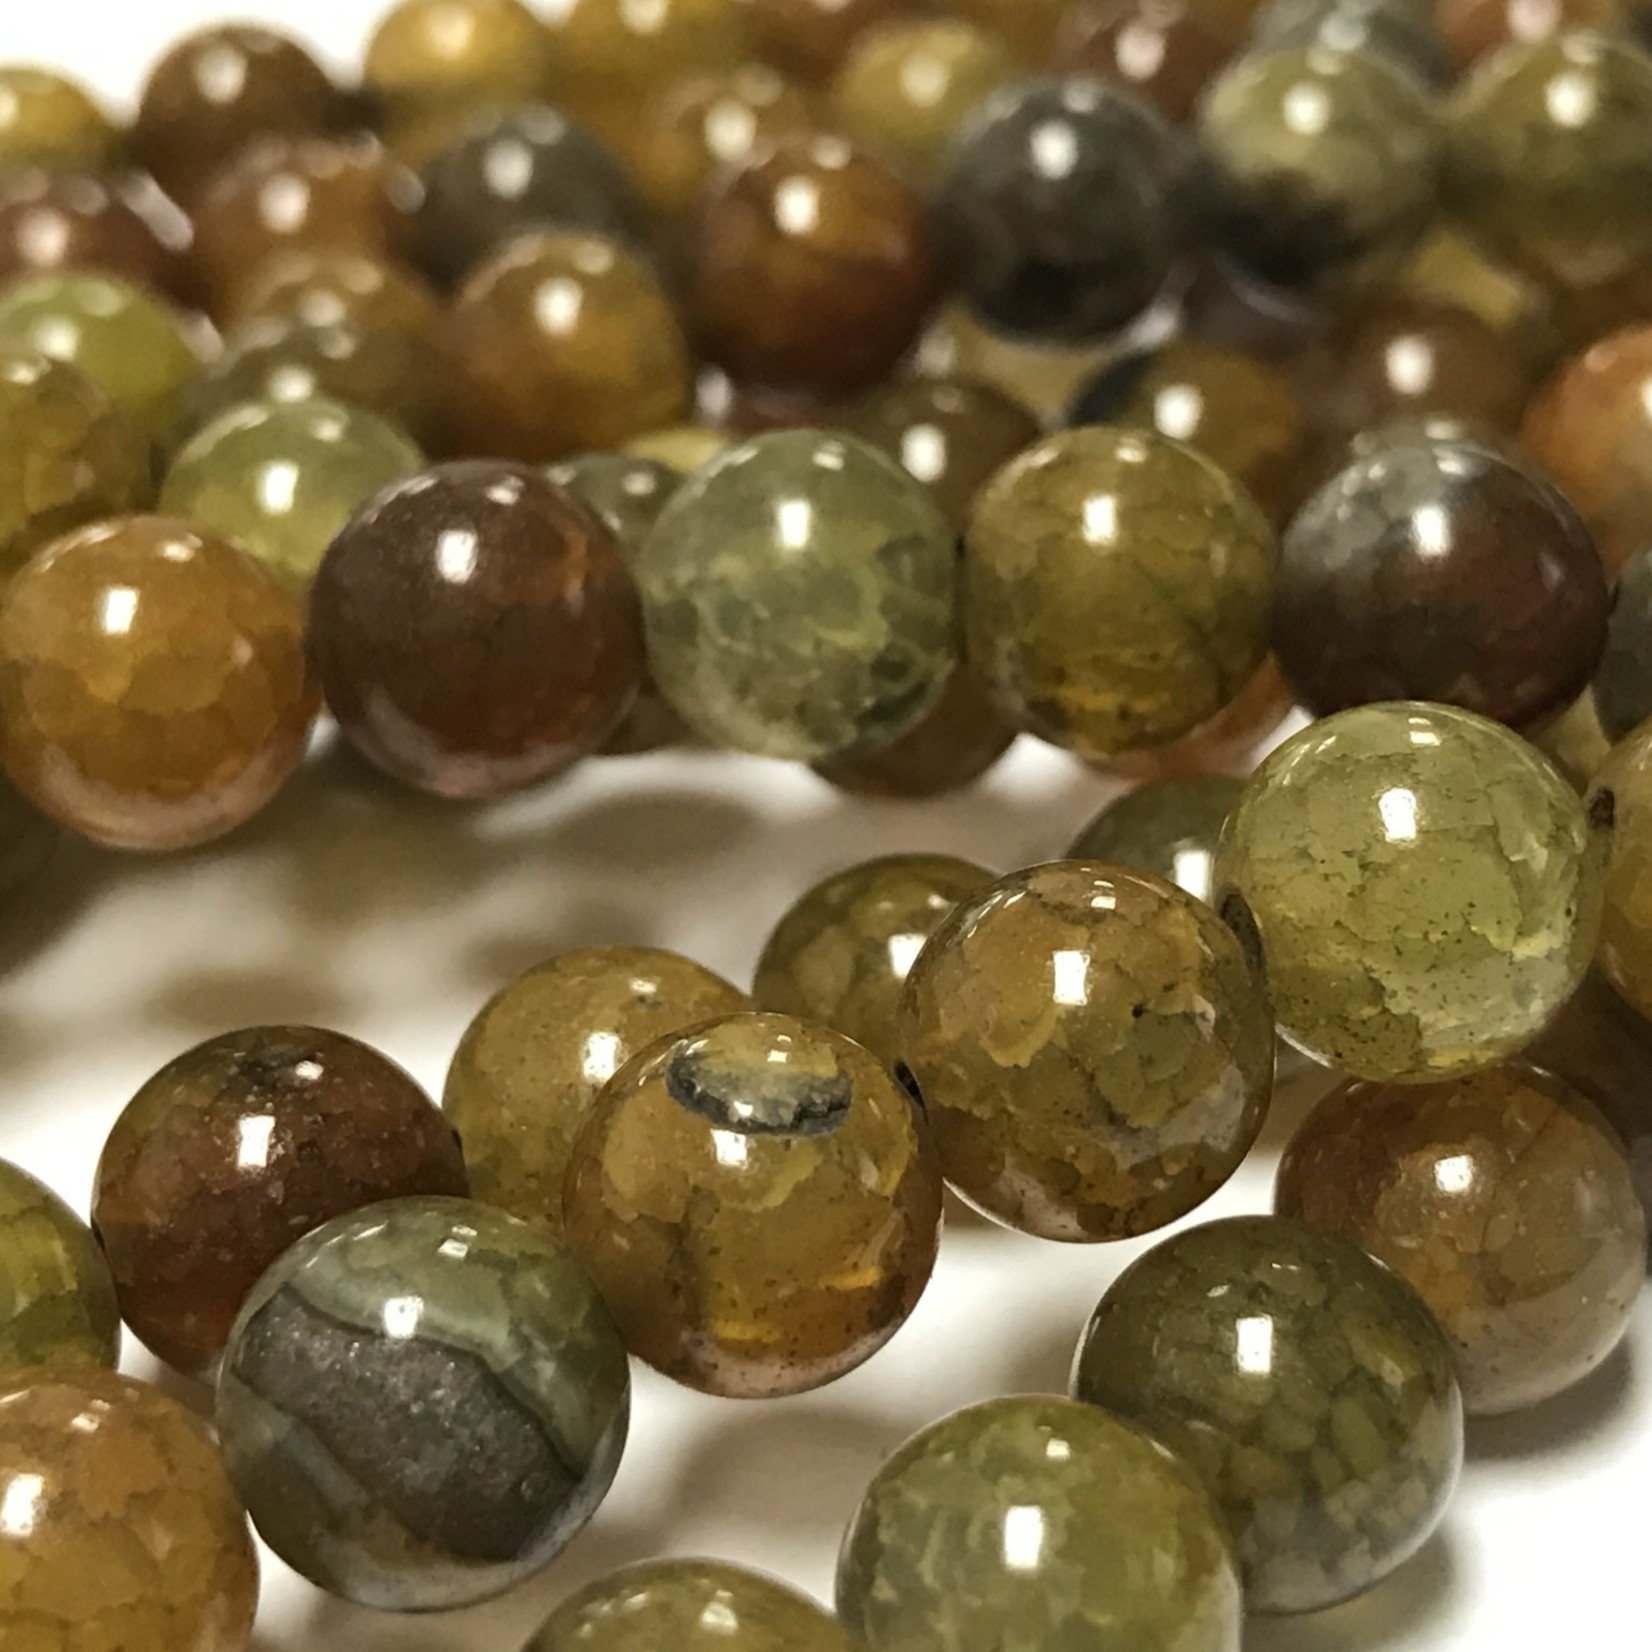 Dyed Fire AGATE Green-Brown 8mm Round